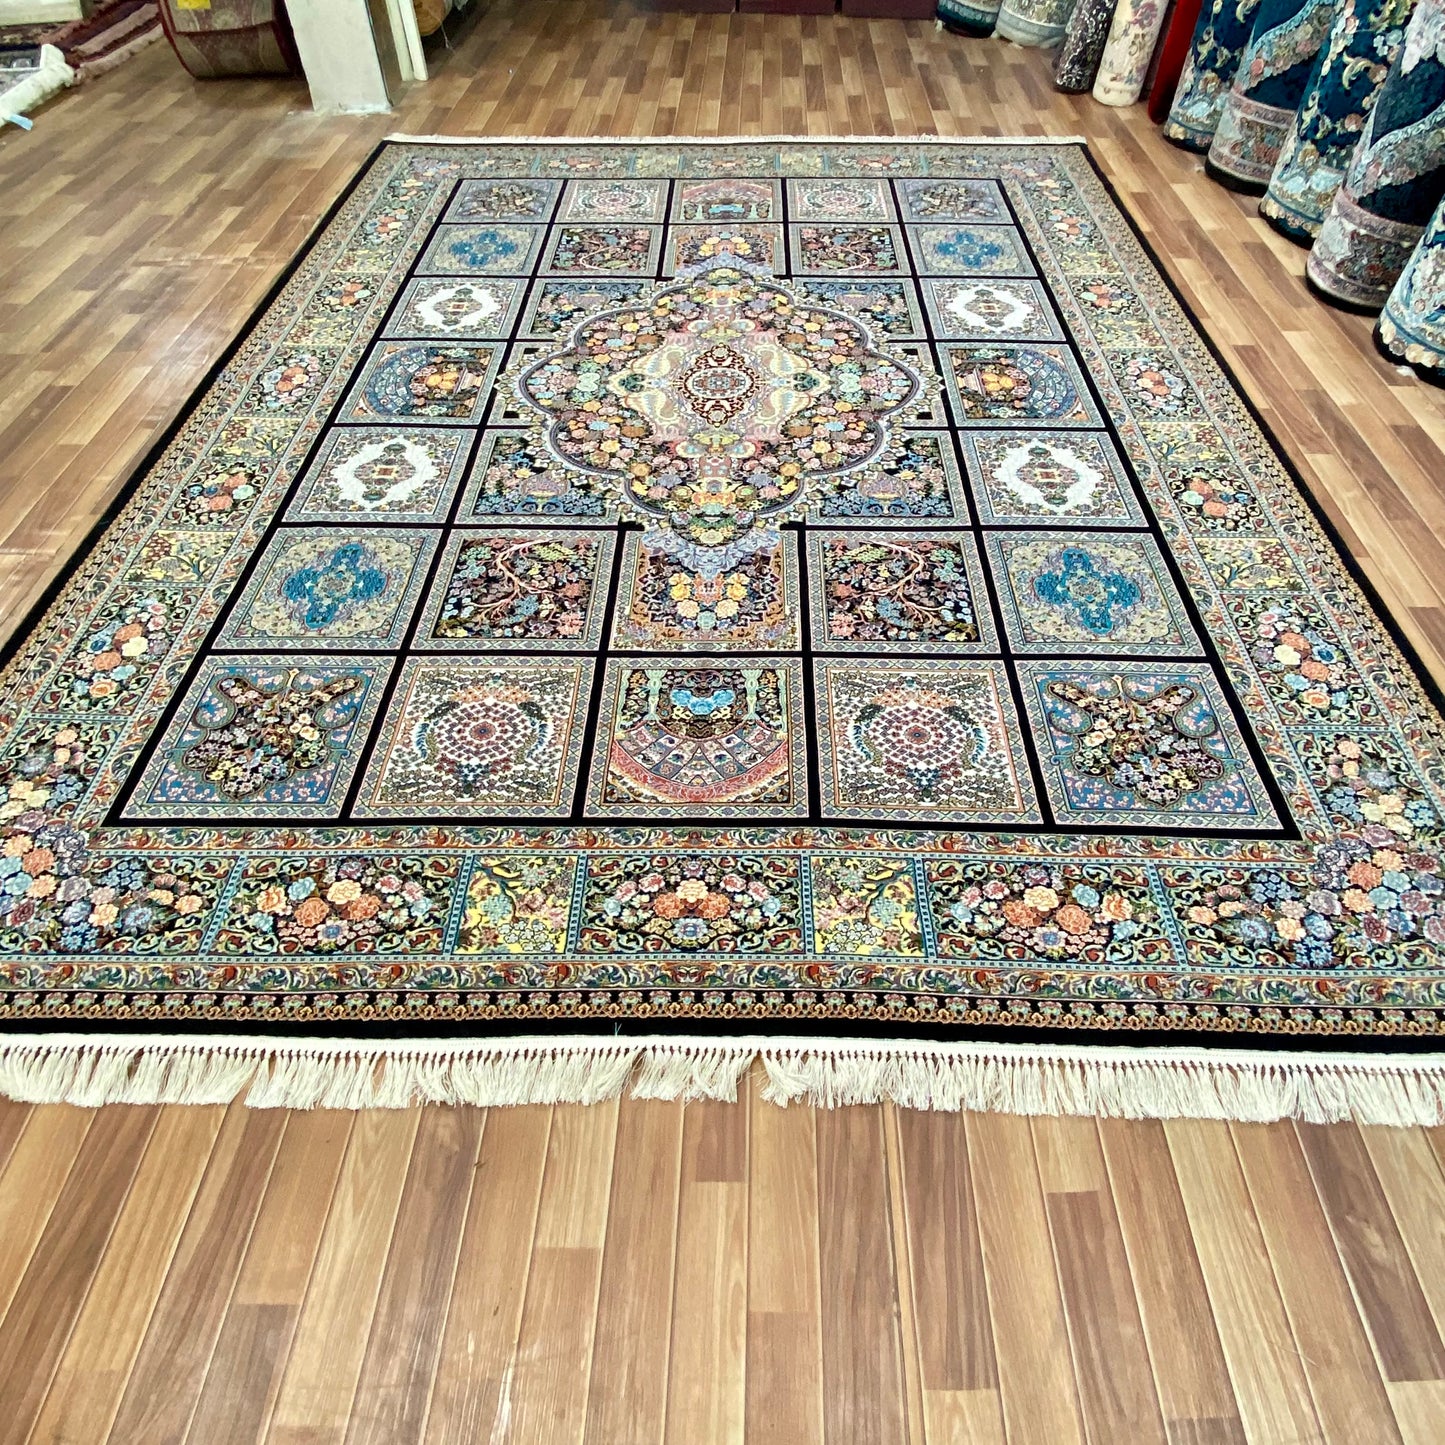 10 ft x 13 ft - Area Rug - 700 Reeds - 1 - Multi Colors - Premium Limited Edition Persian Rug